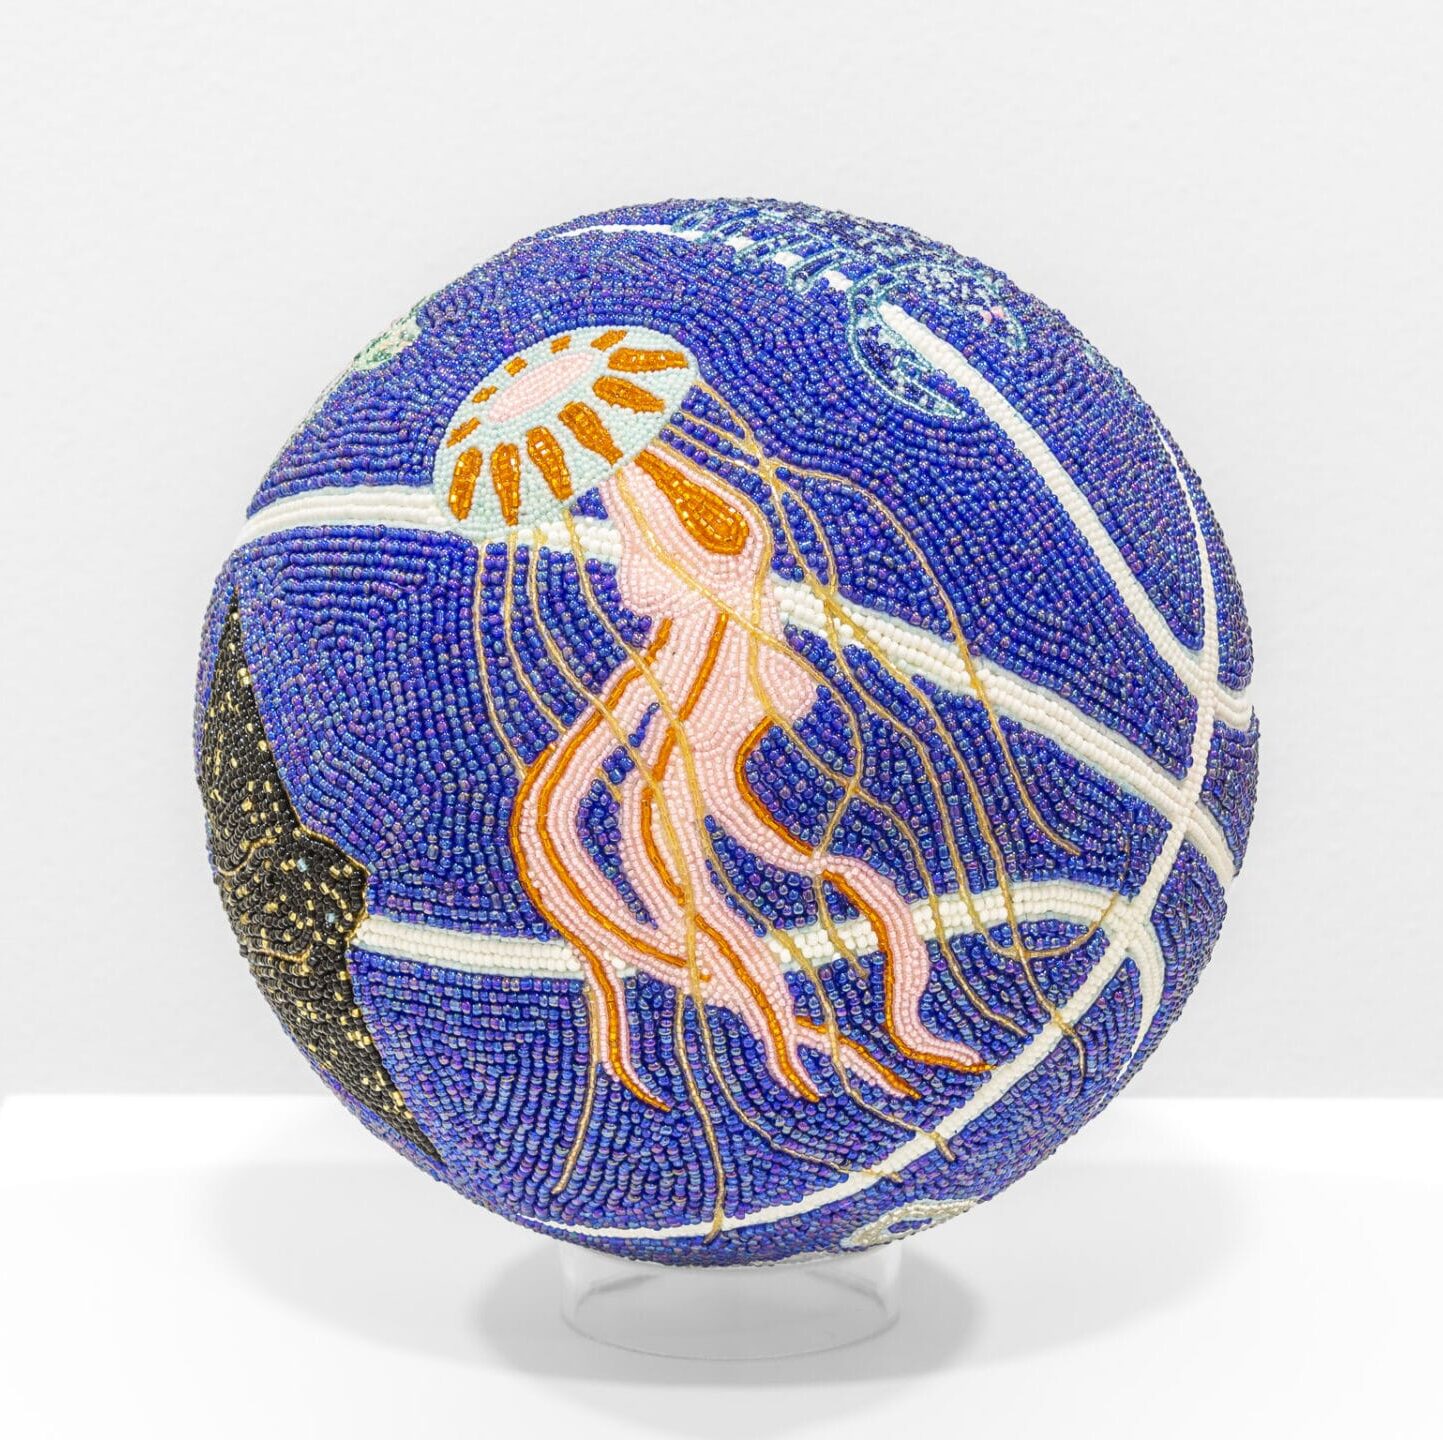 a glass bead-coated spherical sculpture made from a basketball depicting a jellyfish on a dark blue background